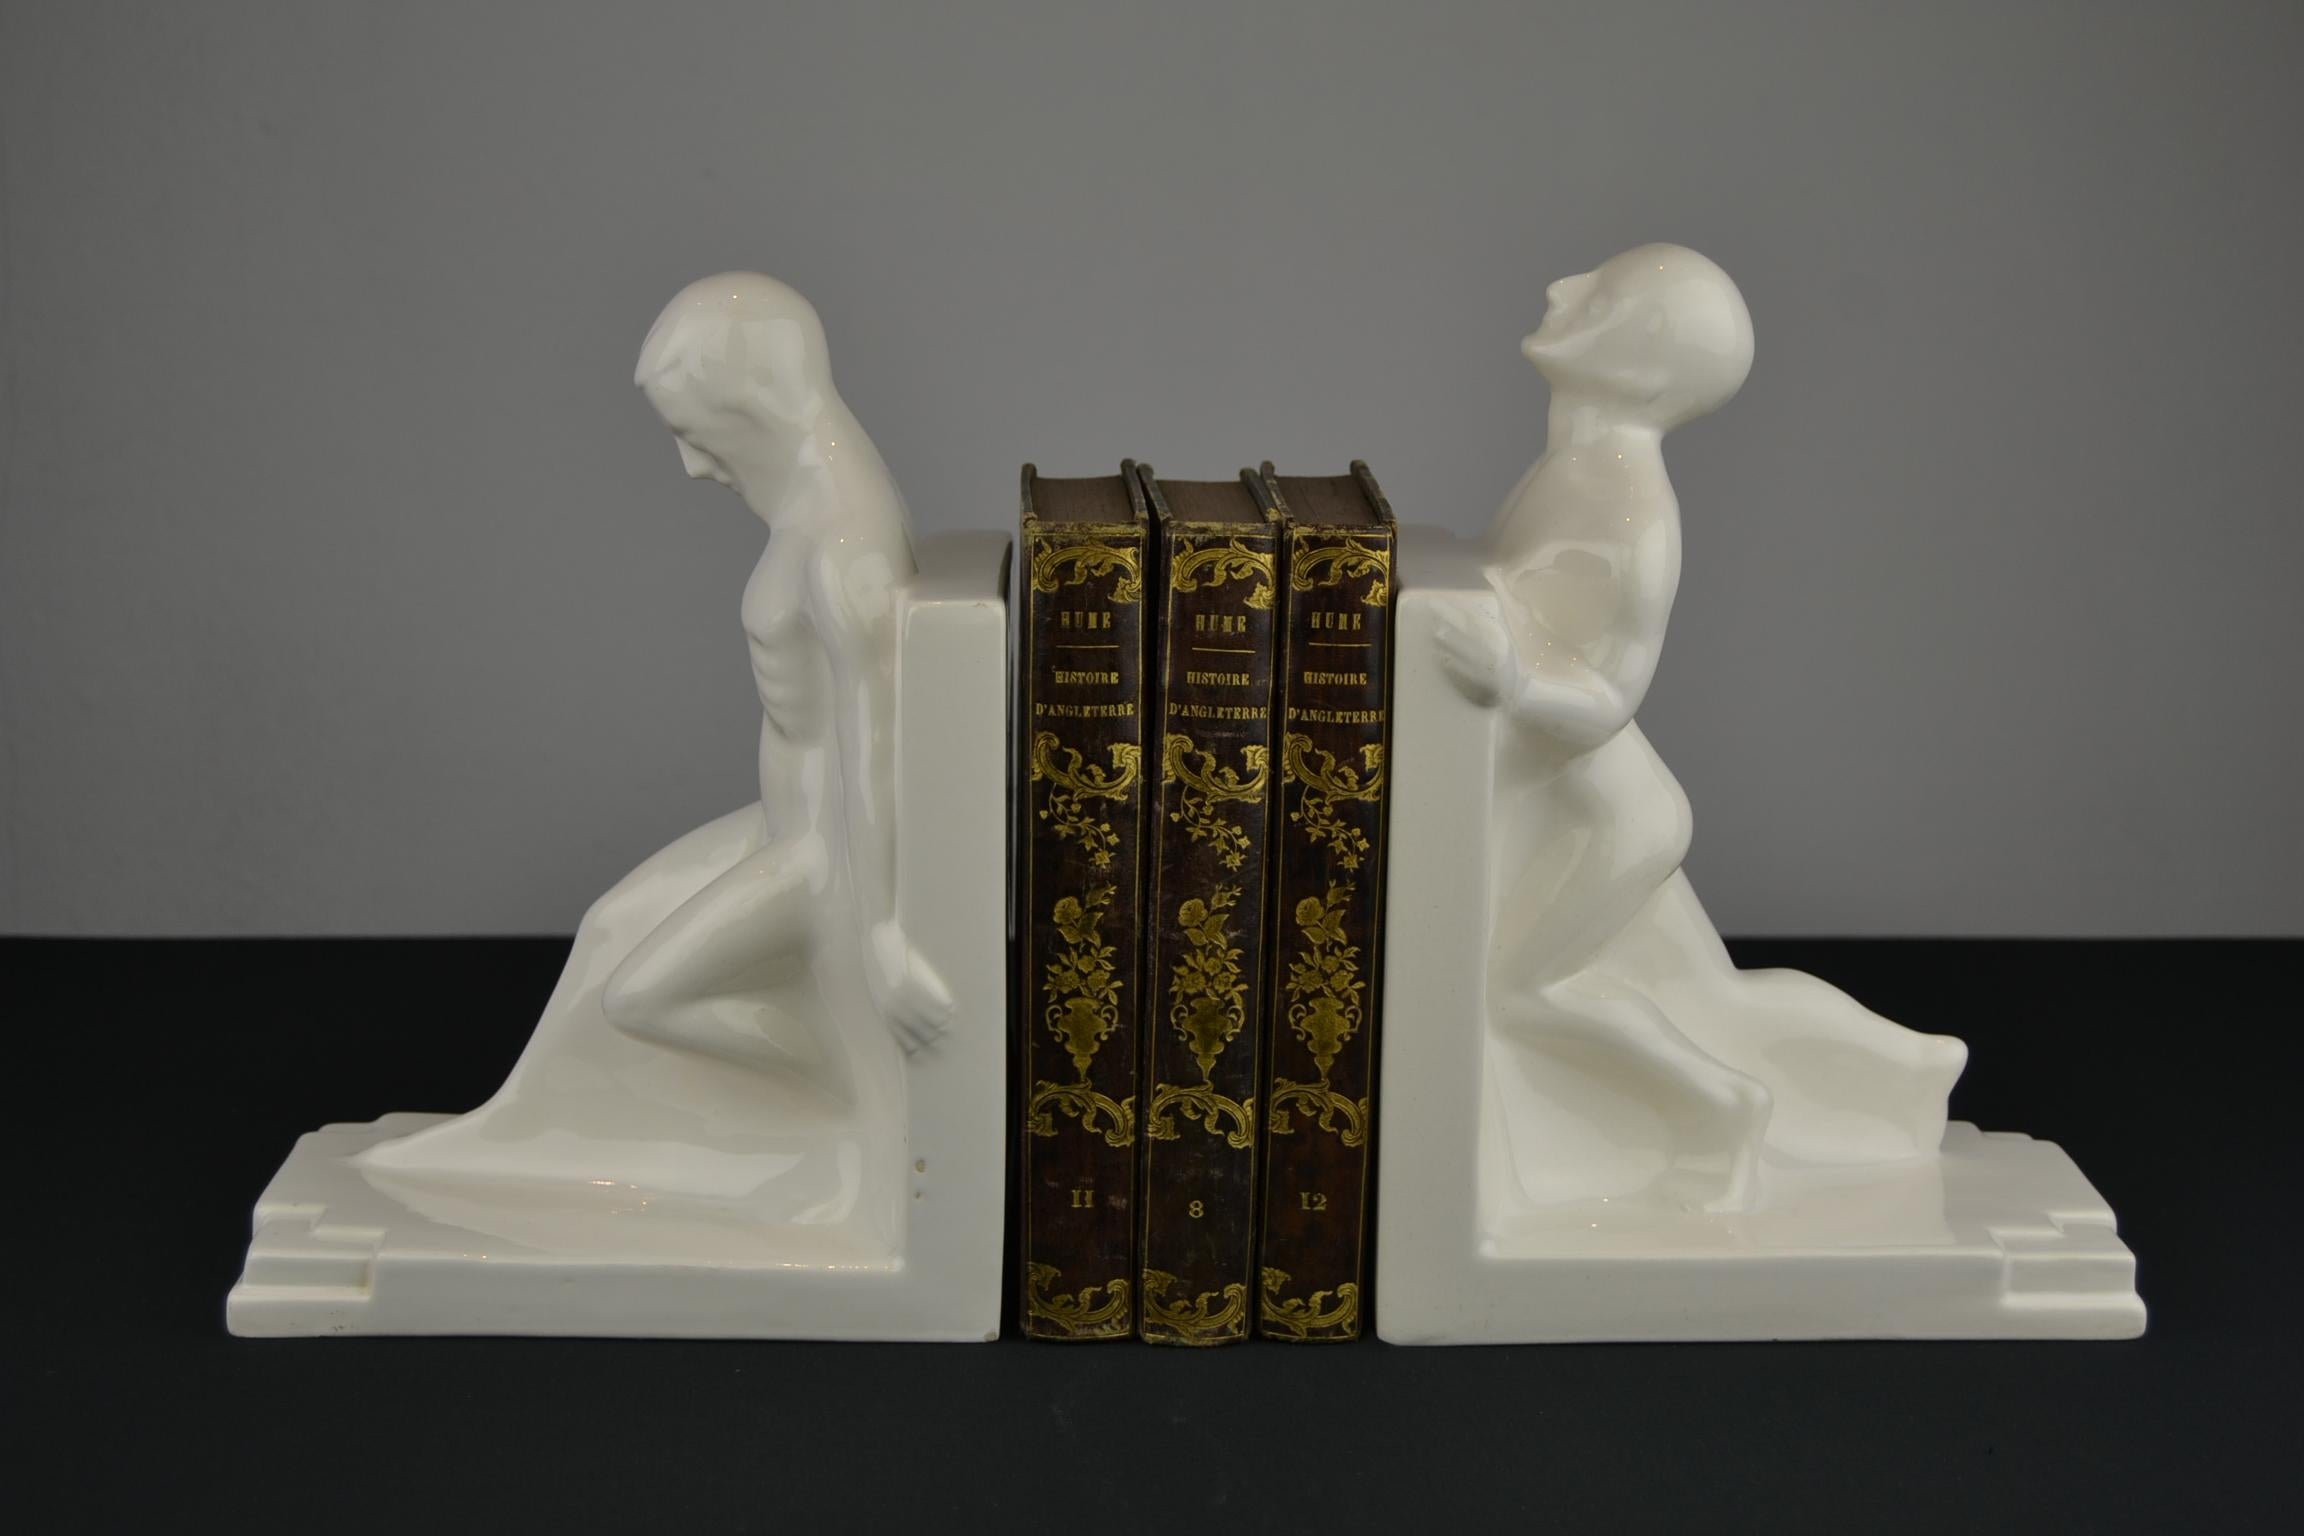 20th Century Large Art Deco Bookends with Nude Muscular Males in White Glazed Ceramic